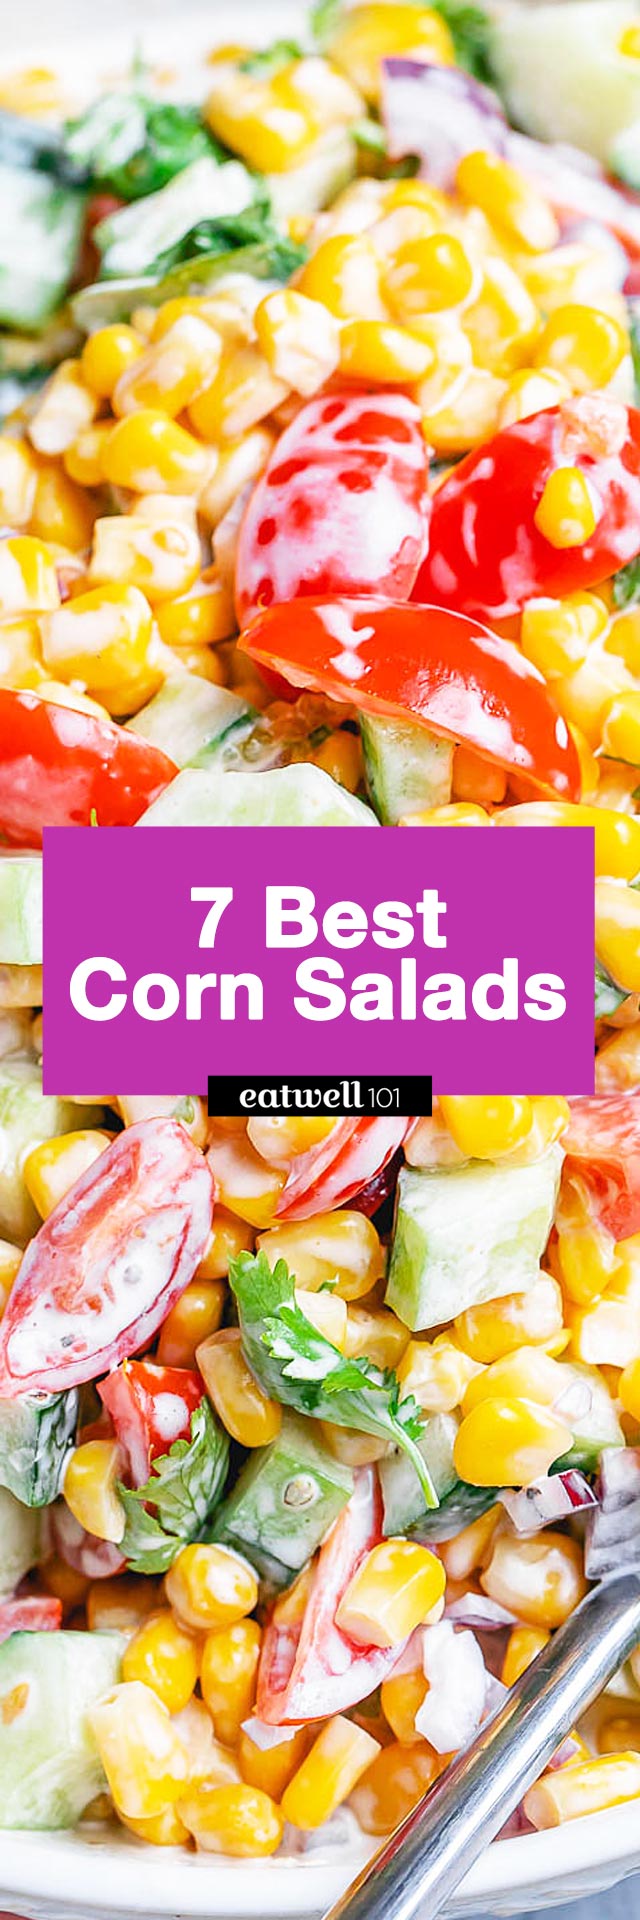 7 Corn Salads to Enjoy all Summer! - #corn #salad #recipes #eatwell101 - Make these easy corn salad recipes and you'll be the star at your next potluck. Enjoy!